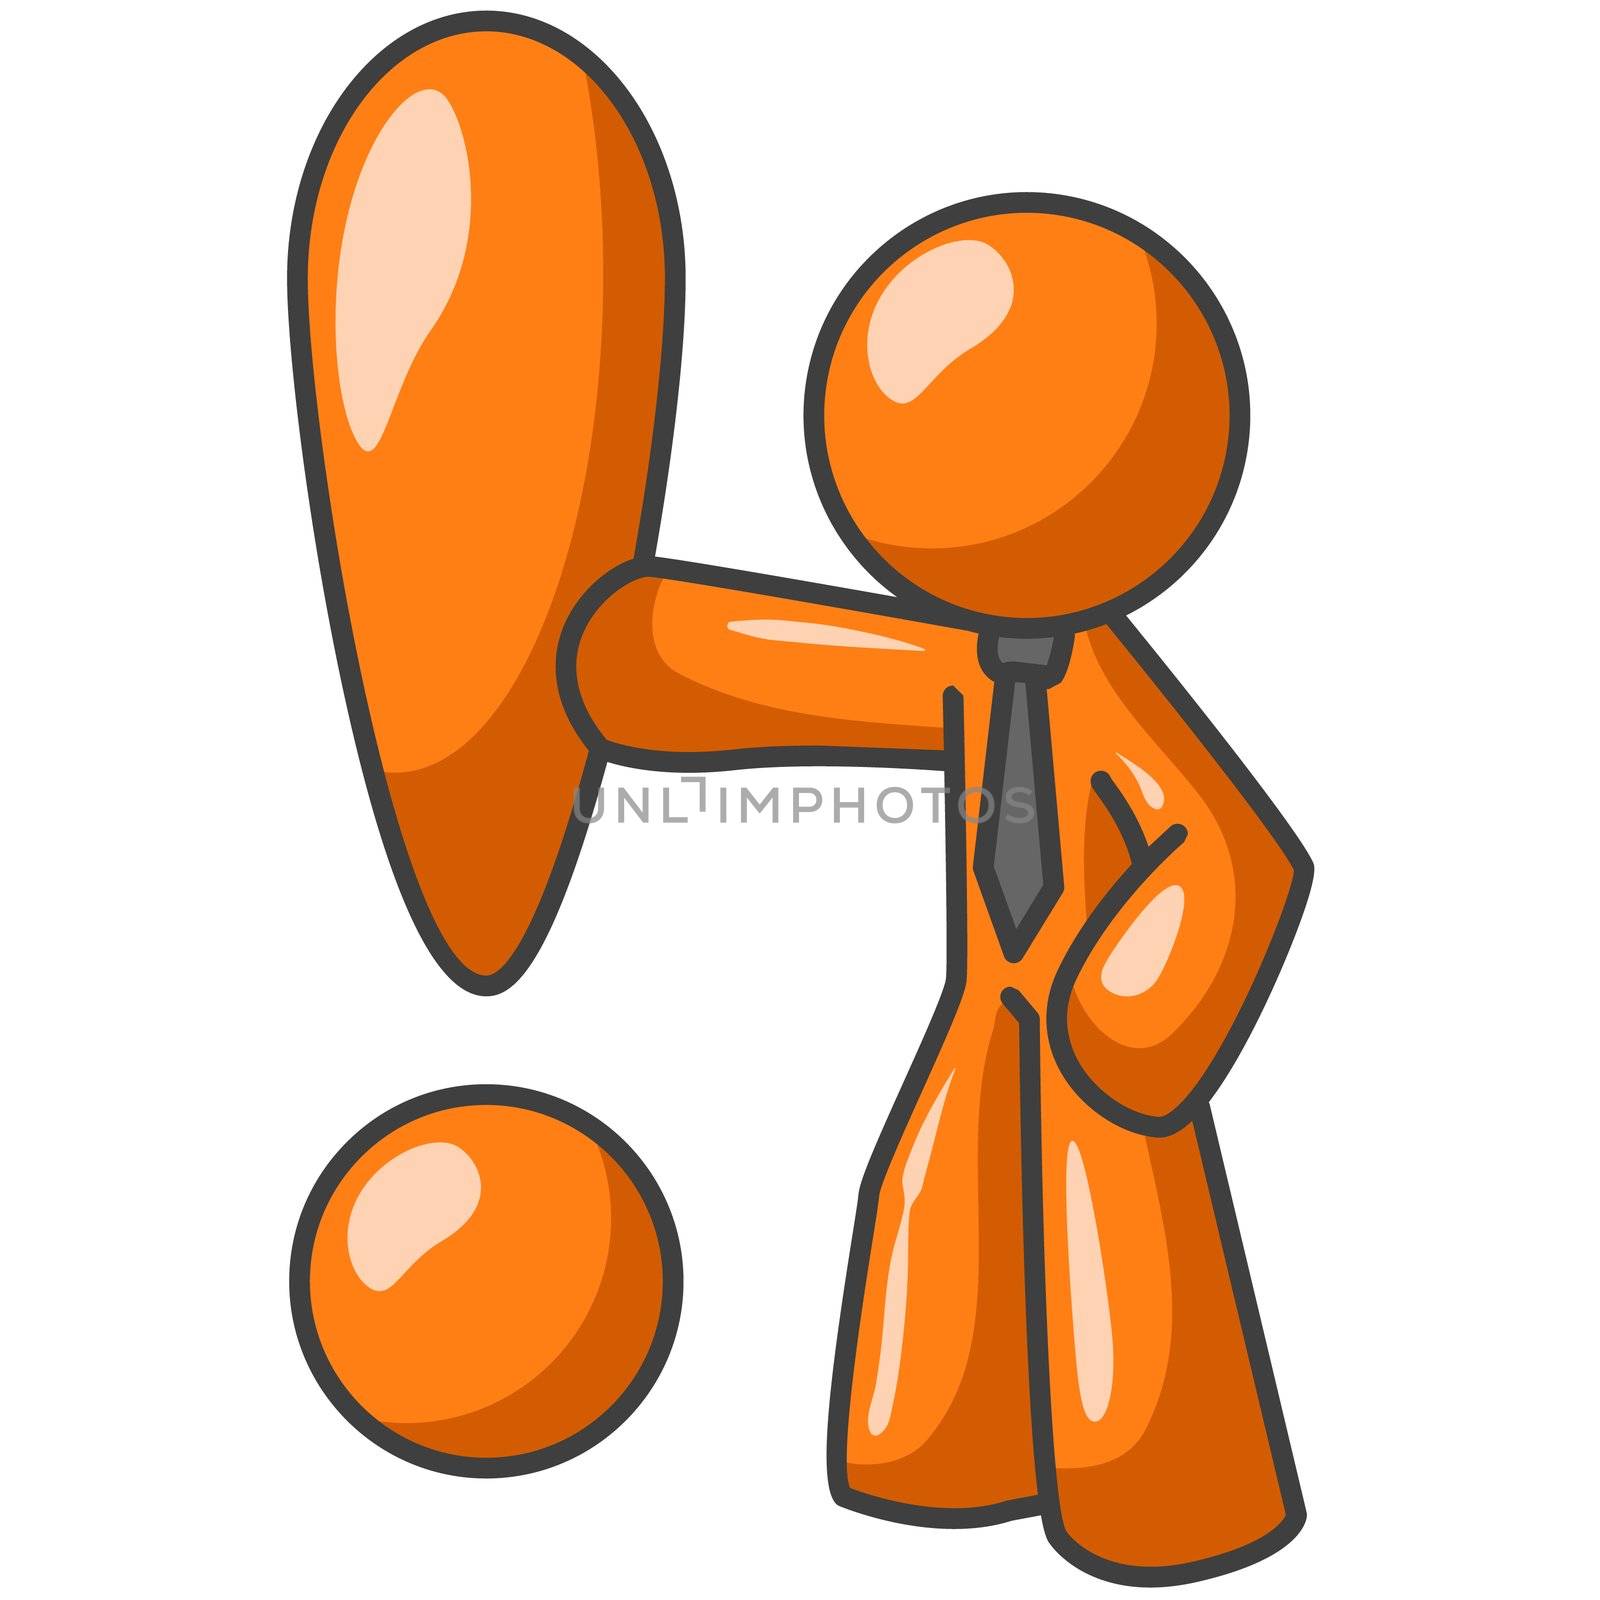 An orange man leaning up against an exclaimation point. 